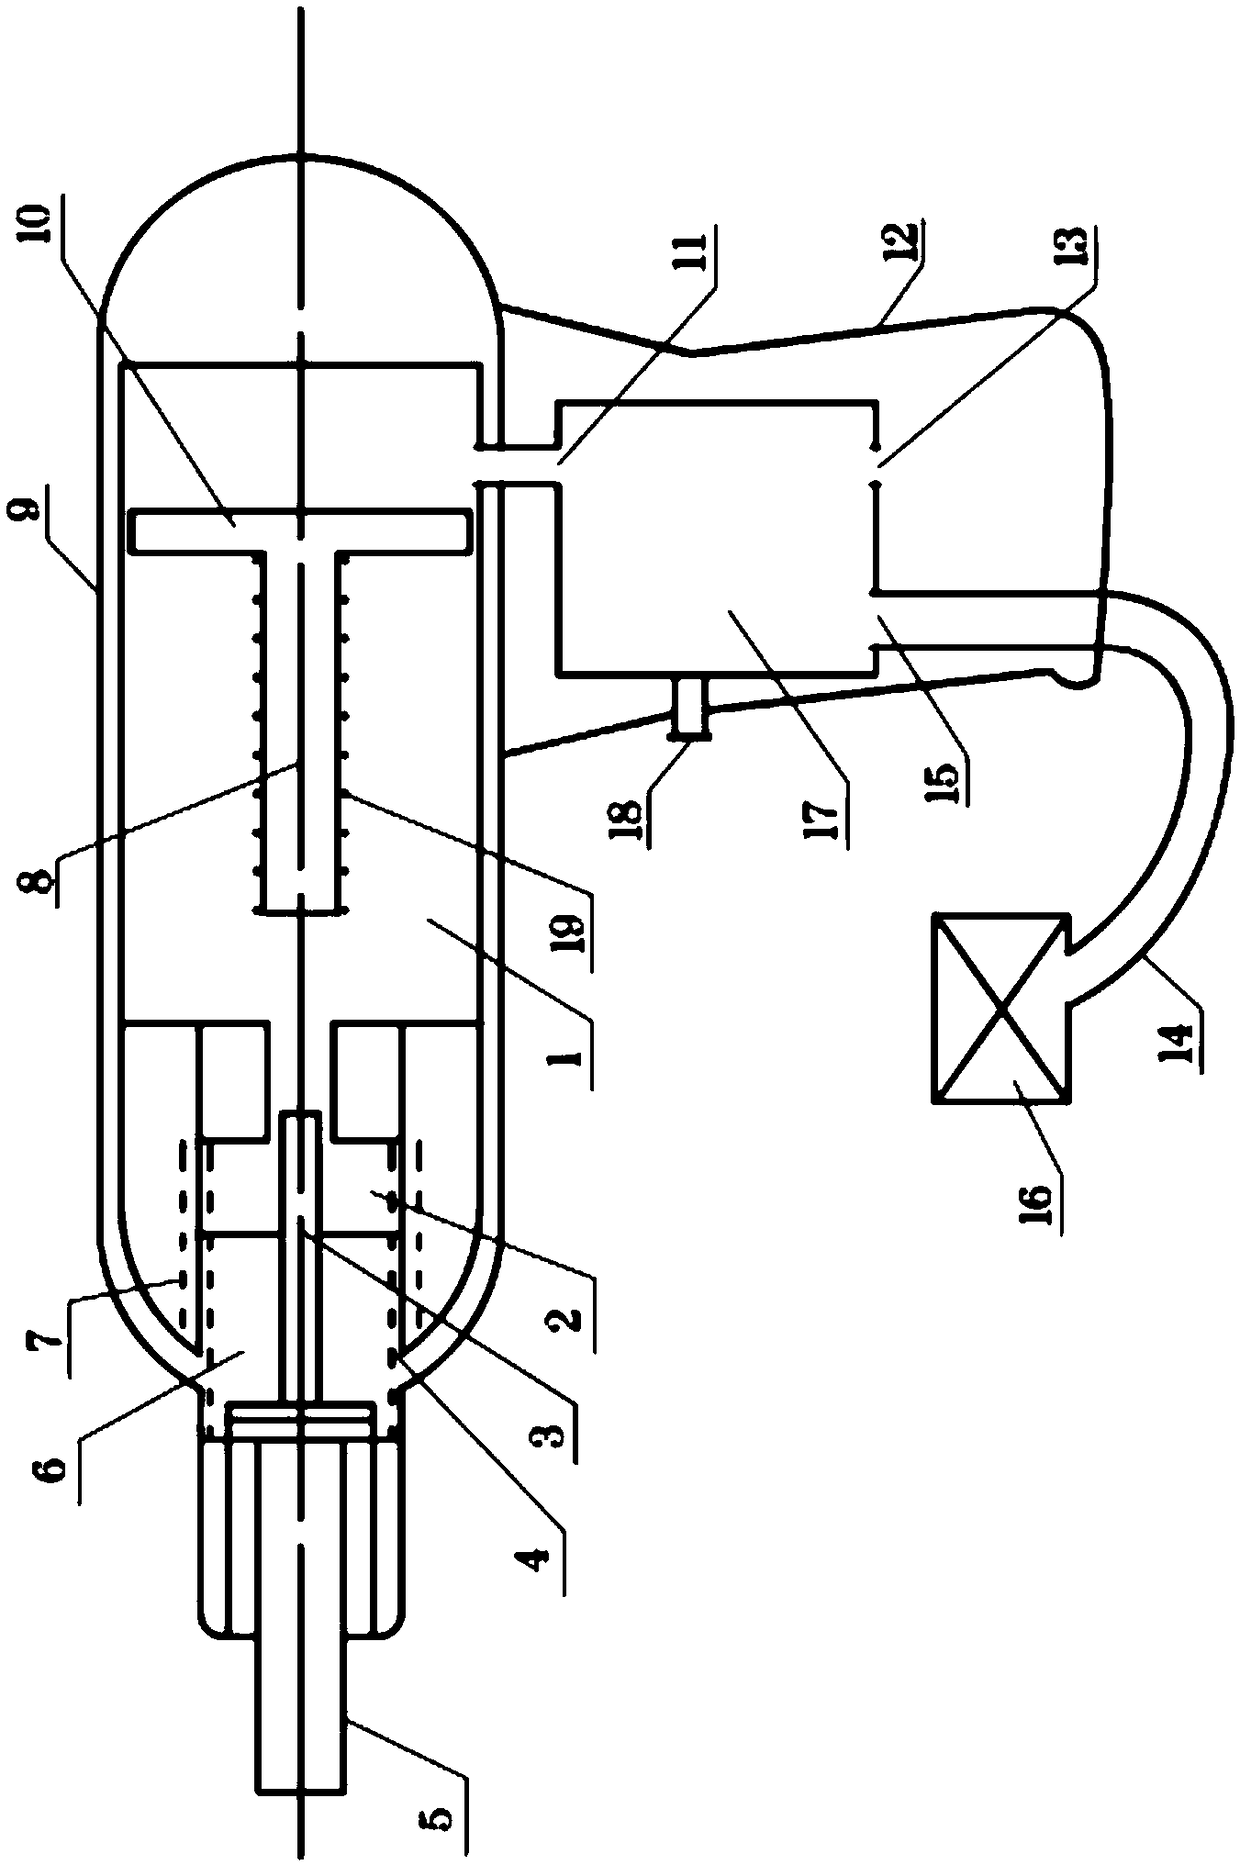 Continuously-adjustable pneumatic needle-free injection apparatus